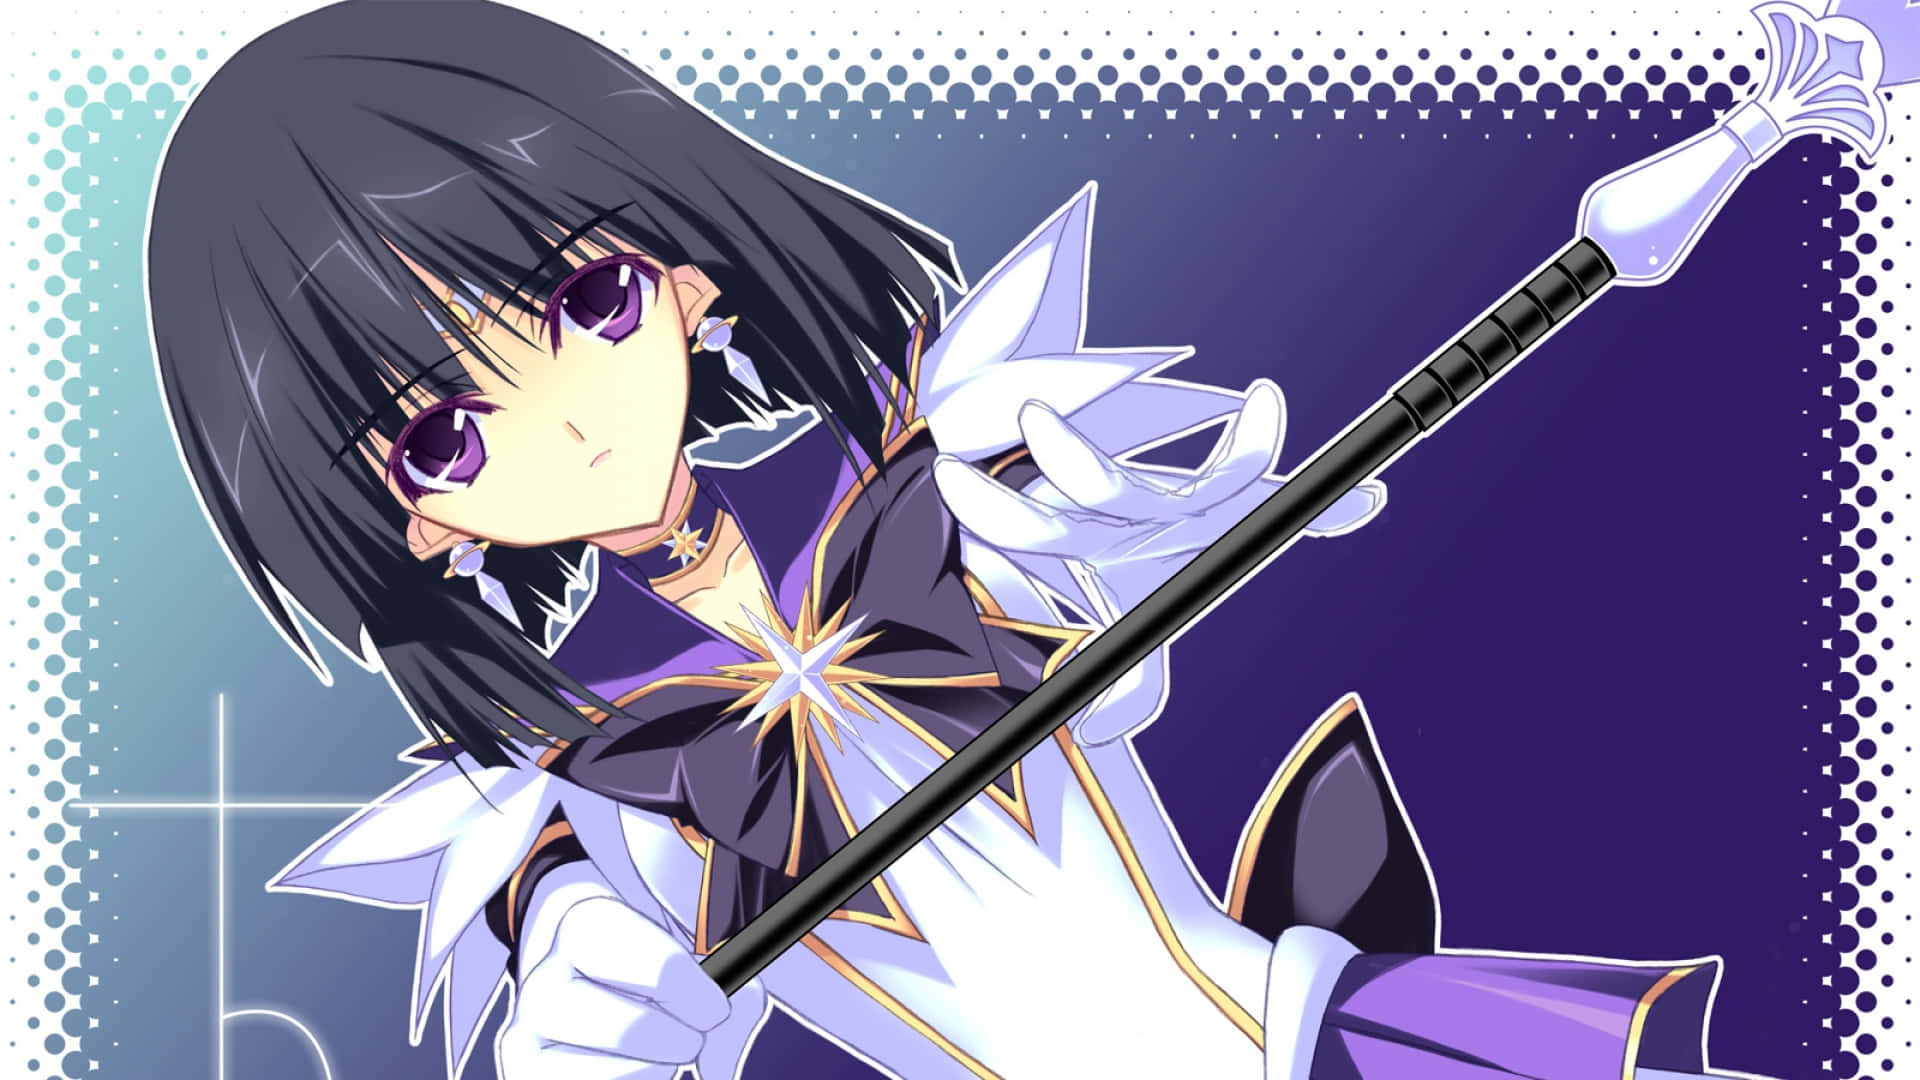 "Sailor Saturn - the Soldier of Destruction and Rebirth" Wallpaper